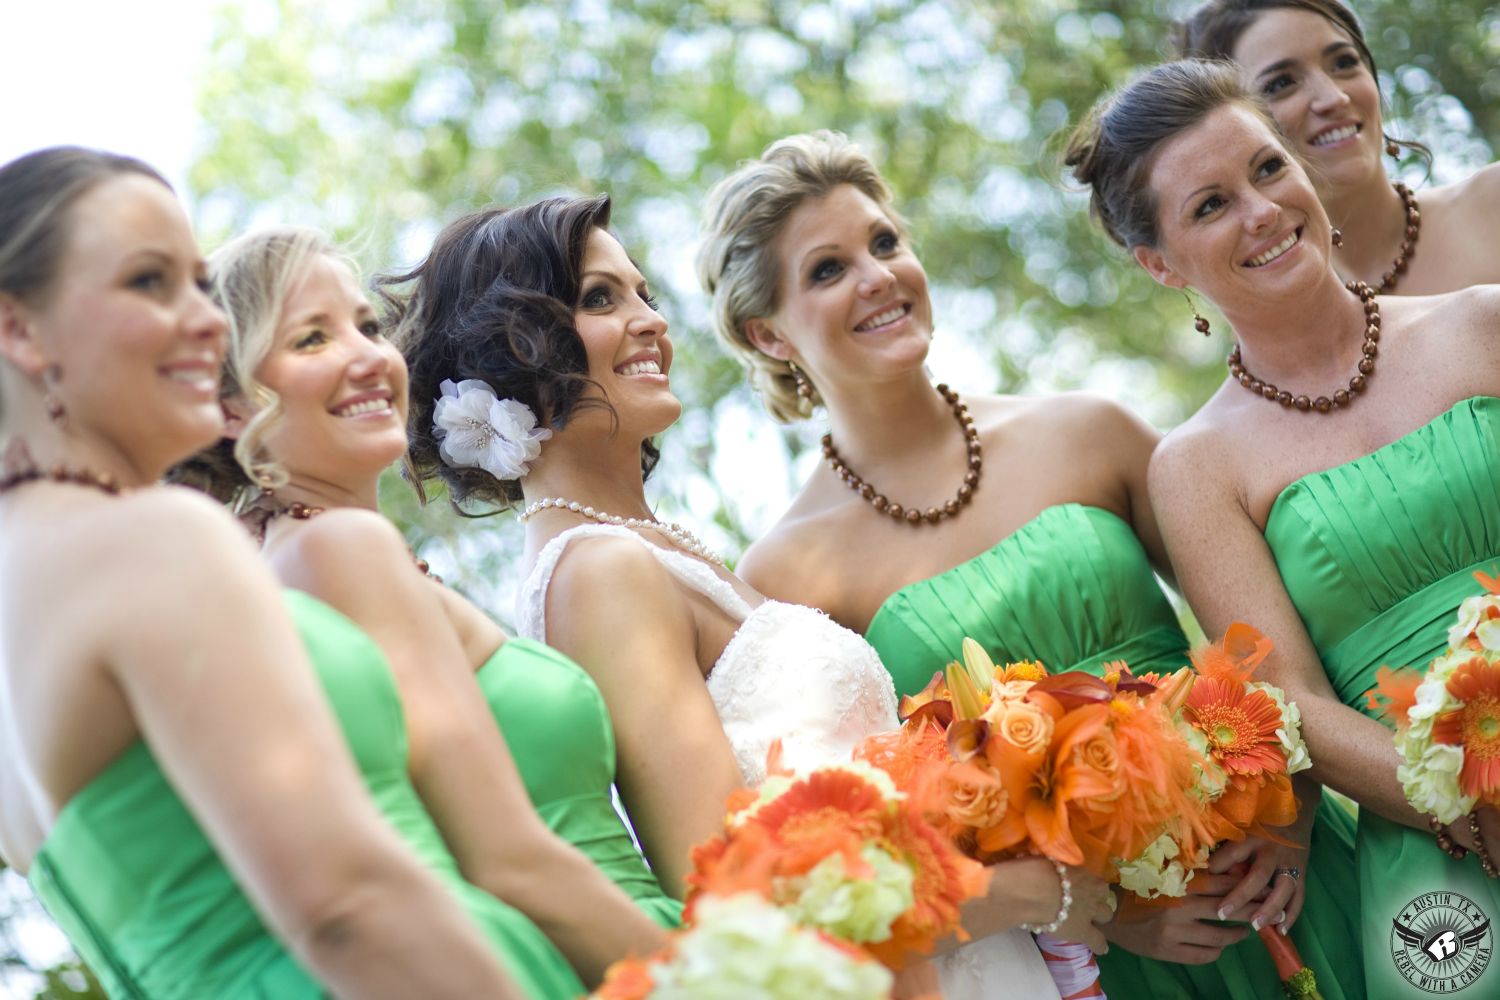 Austin wedding photography of austin wedding coordinator, Lindsay Blackwell, with makeup by Maris Malone Calderon on her wedding day with her bridesmaids in green dress and orange floral bouquets by Photosynthesis Austin wedding florist at Nature's Point Austin wedding venue.